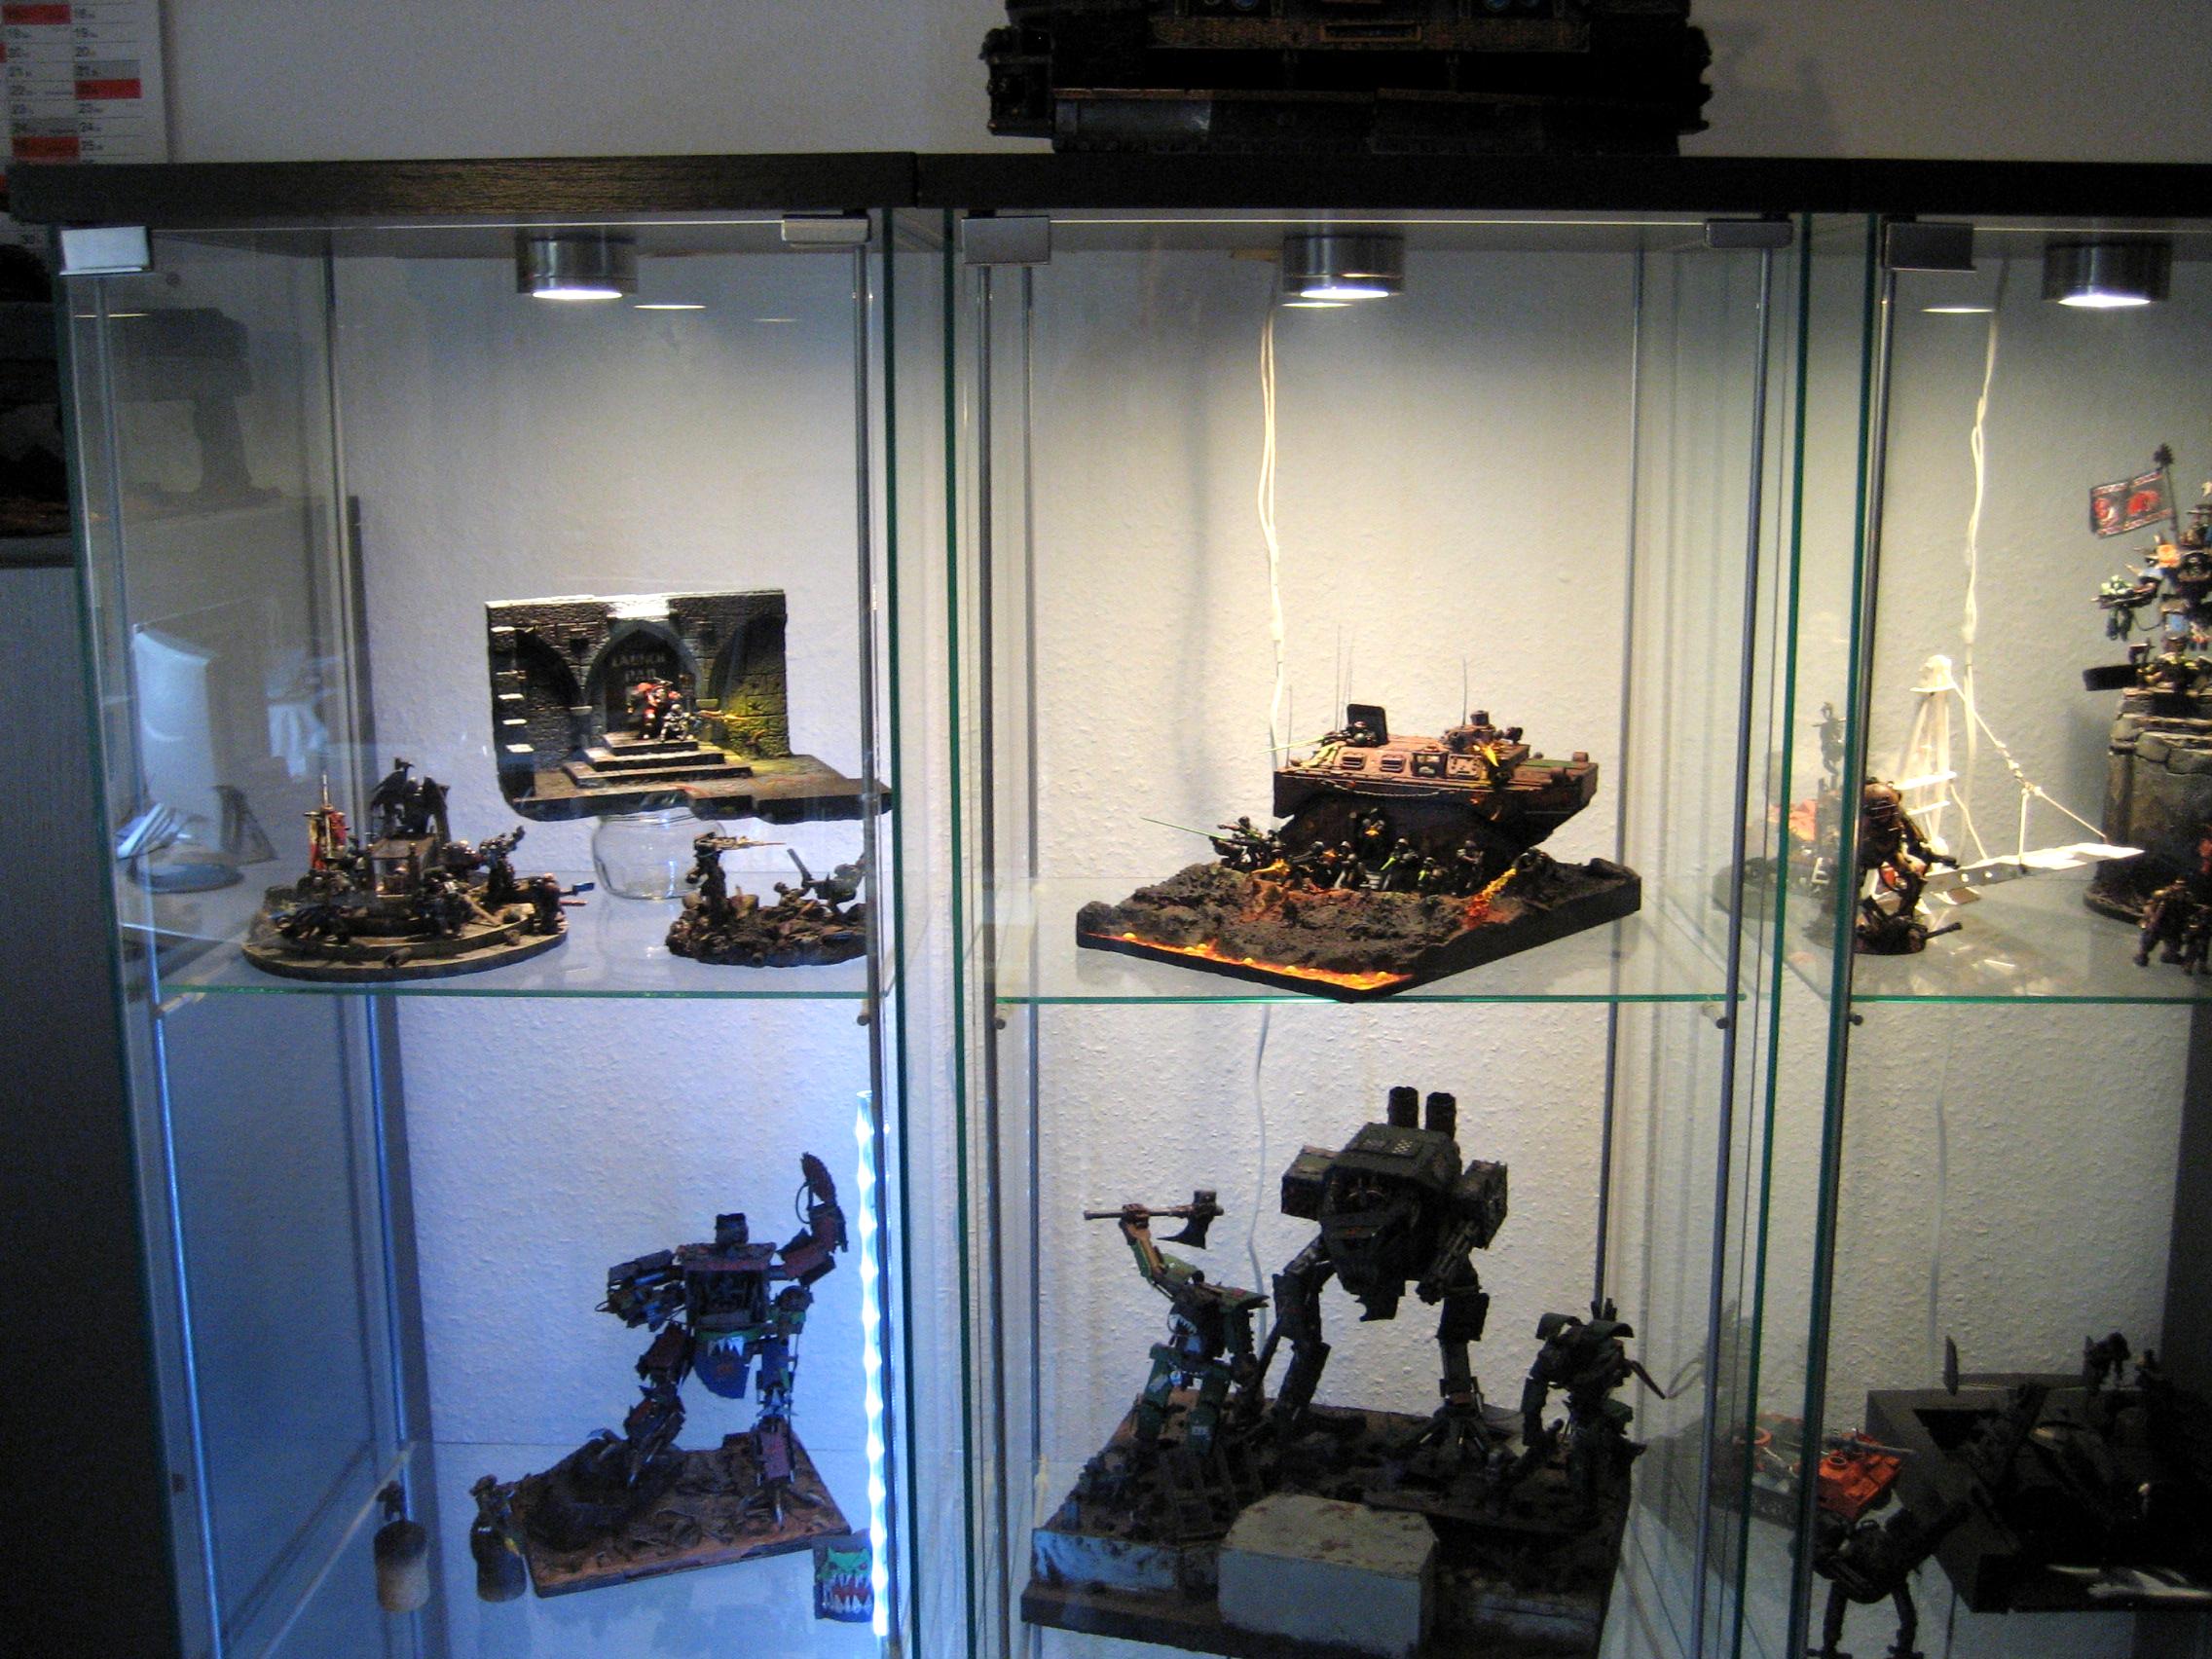 Cabinets, Diorama, Orkalypse in the cabinet